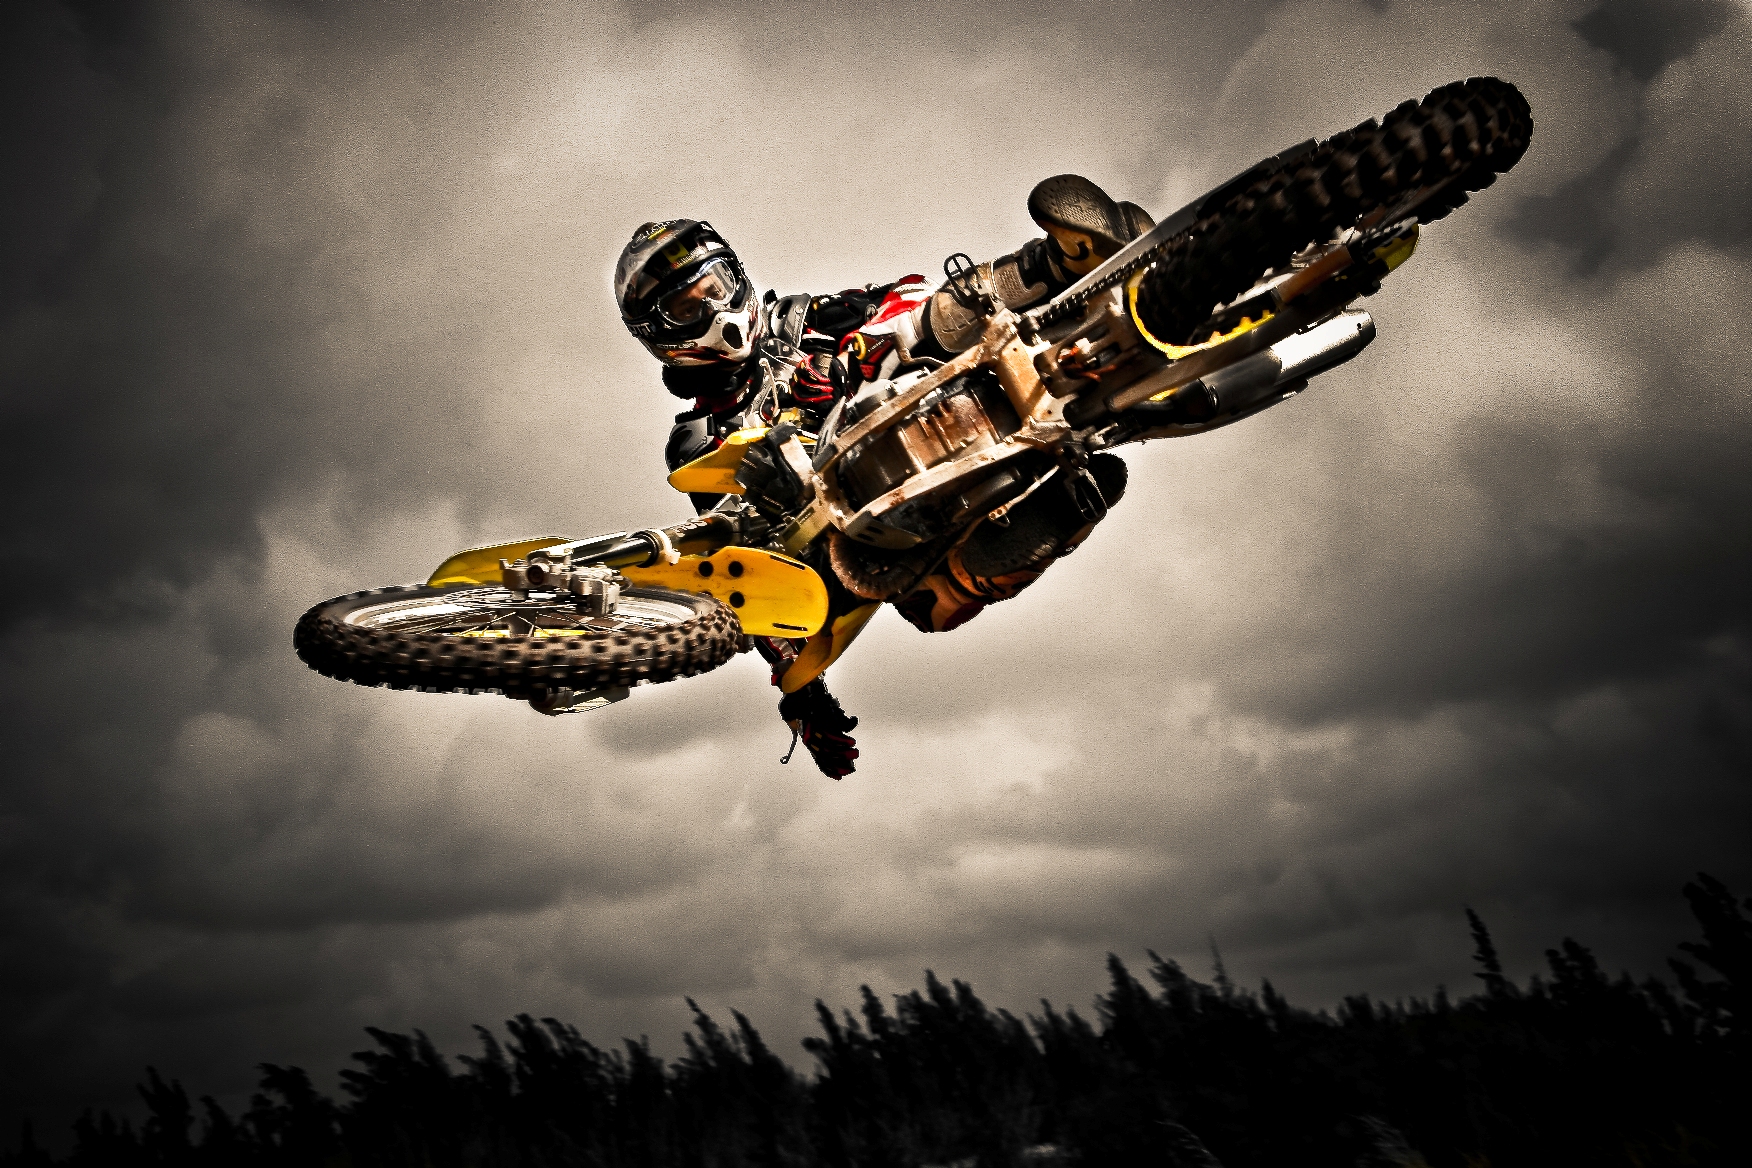 Free download 2021 Washougal Motocross Road Jump Wallpapers Swapmoto Live  [2560x1600] for your Desktop, Mobile & Tablet | Explore 27+ Motocross  Racing Wallpapers | Motocross Wallpaper 2015, Motocross Wallpapers, Motocross  Backgrounds